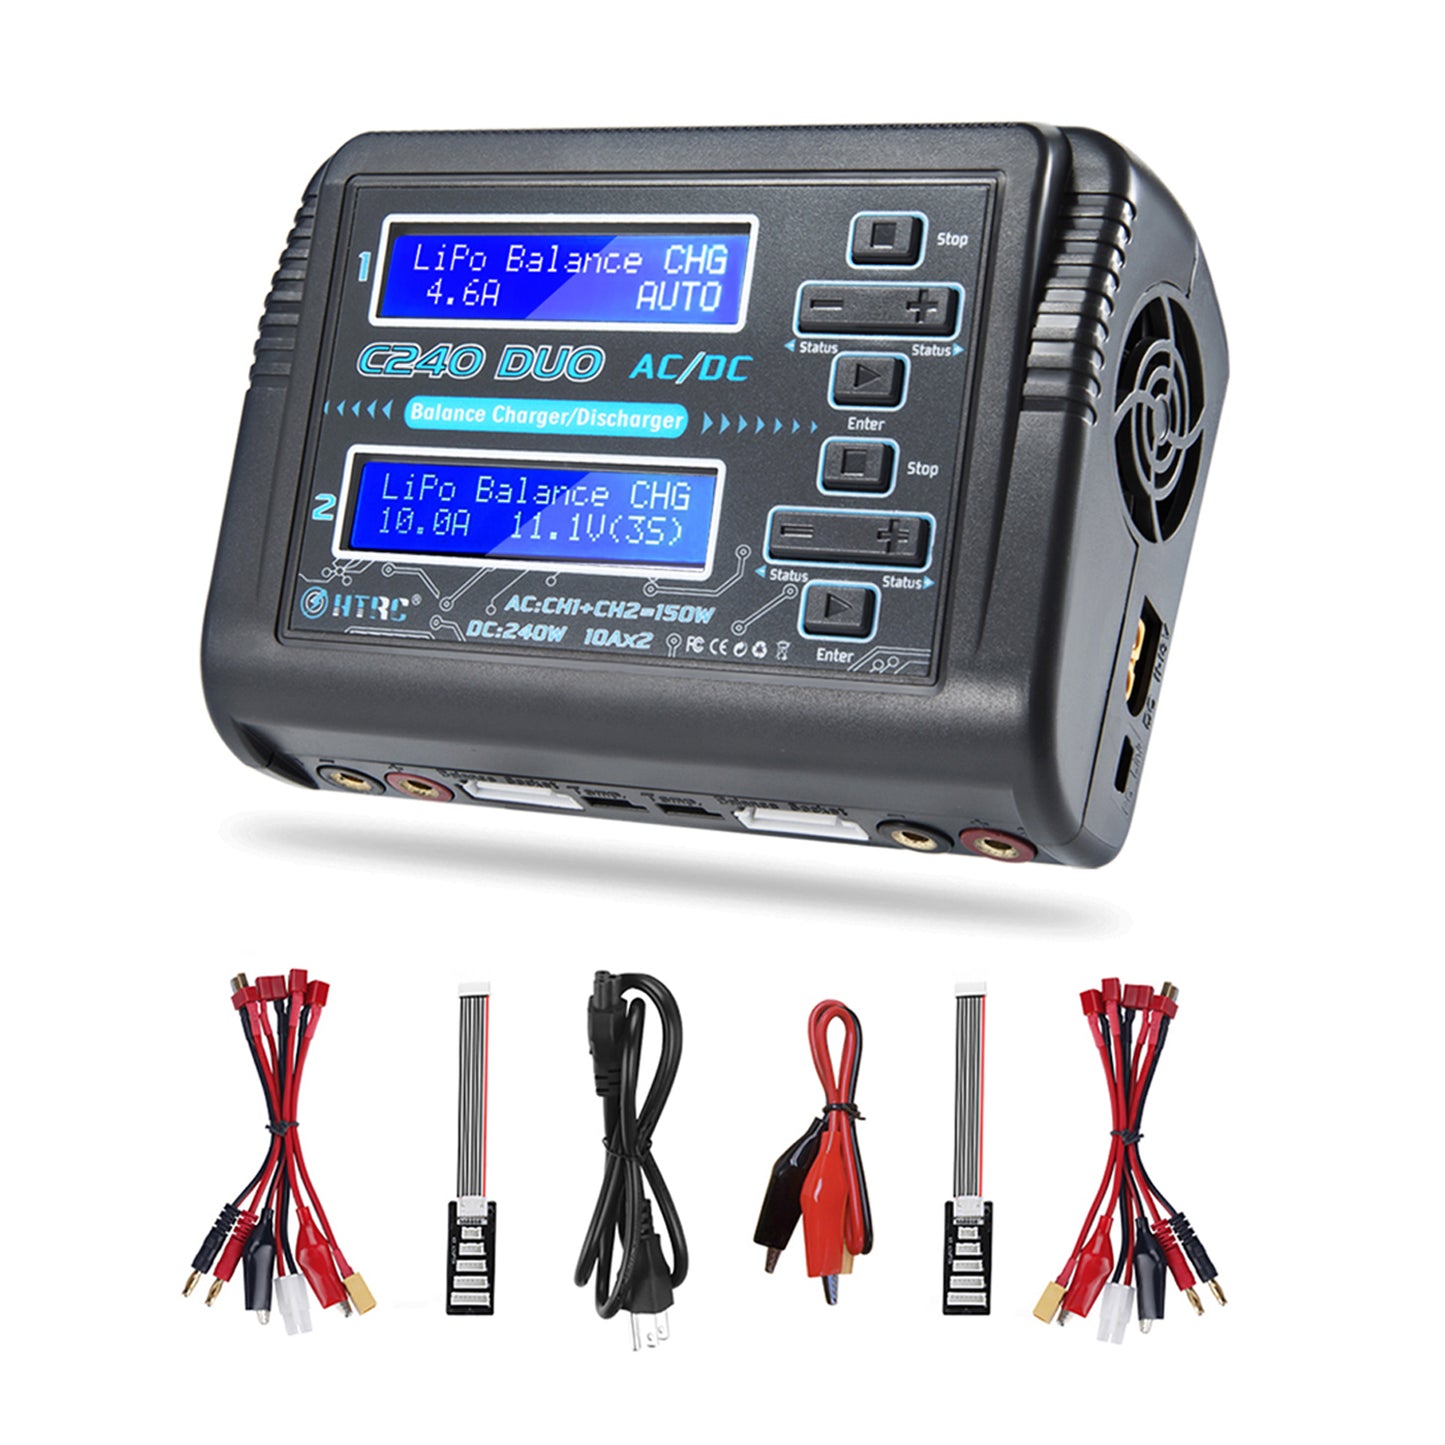 Andrew Halliday Pind gateway HTRC LiPo Charger Dual RC Charger 1-6S Balance Battery Discharger C240